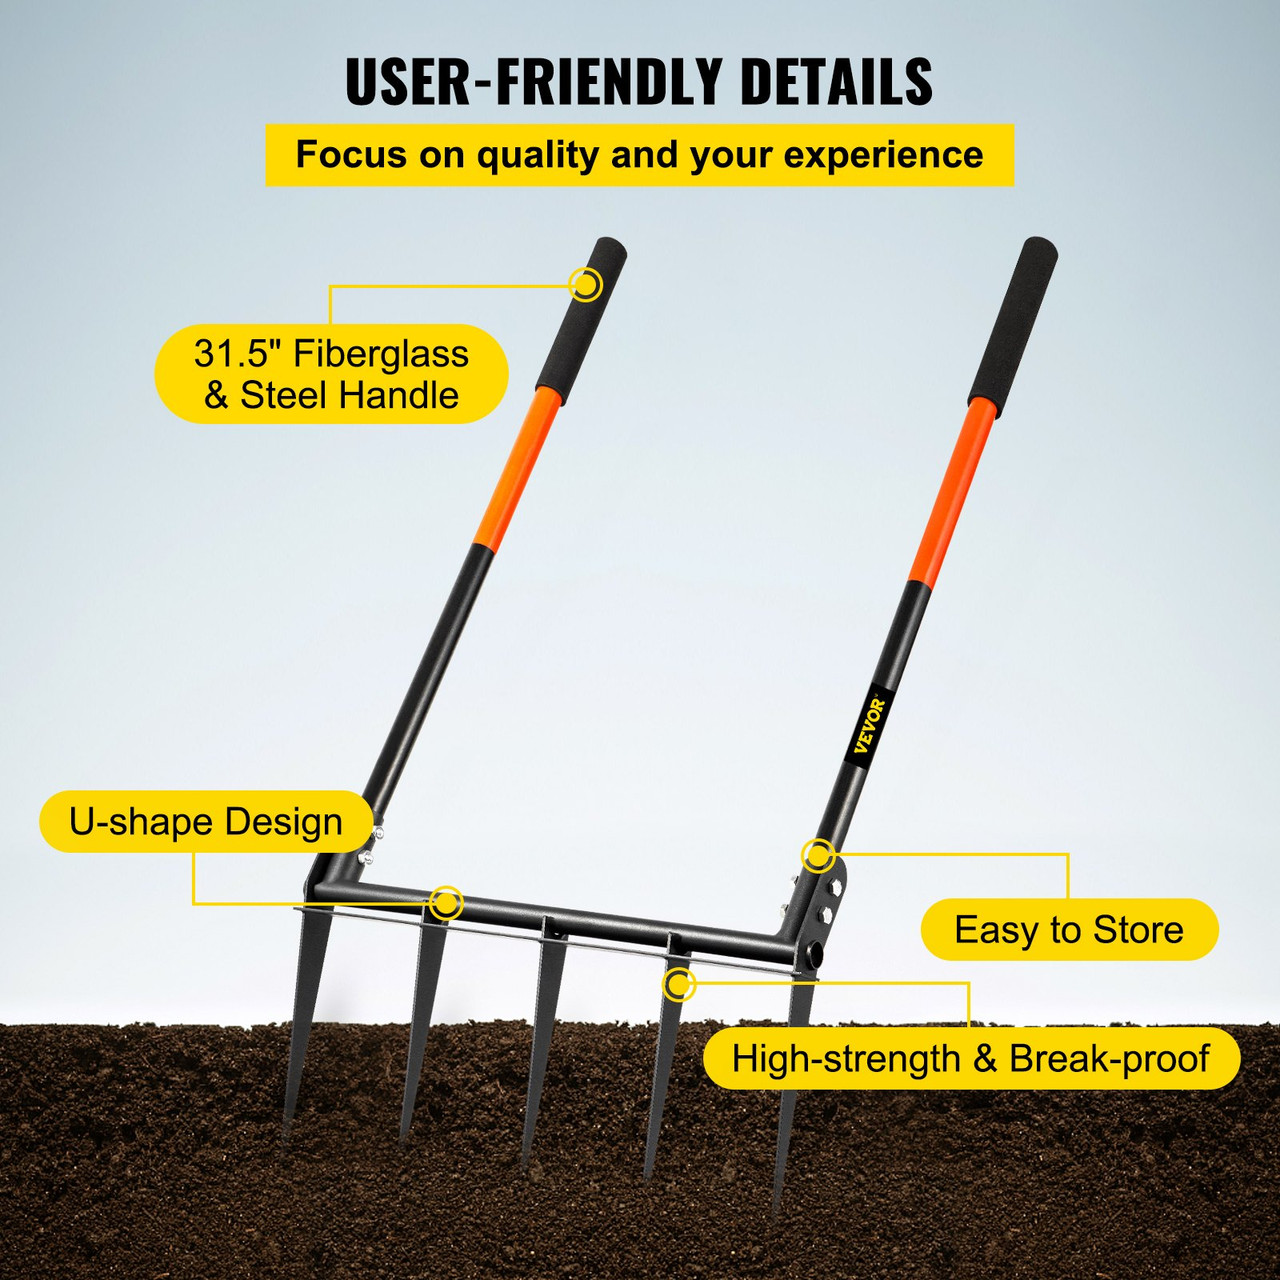 Broad Fork Tool, 5 Tines 20 in Wide, Garden Tool with Fiberglass Handle for Gardening and Cultivating, Aerate Clay Soil for Farm (100-16649) 